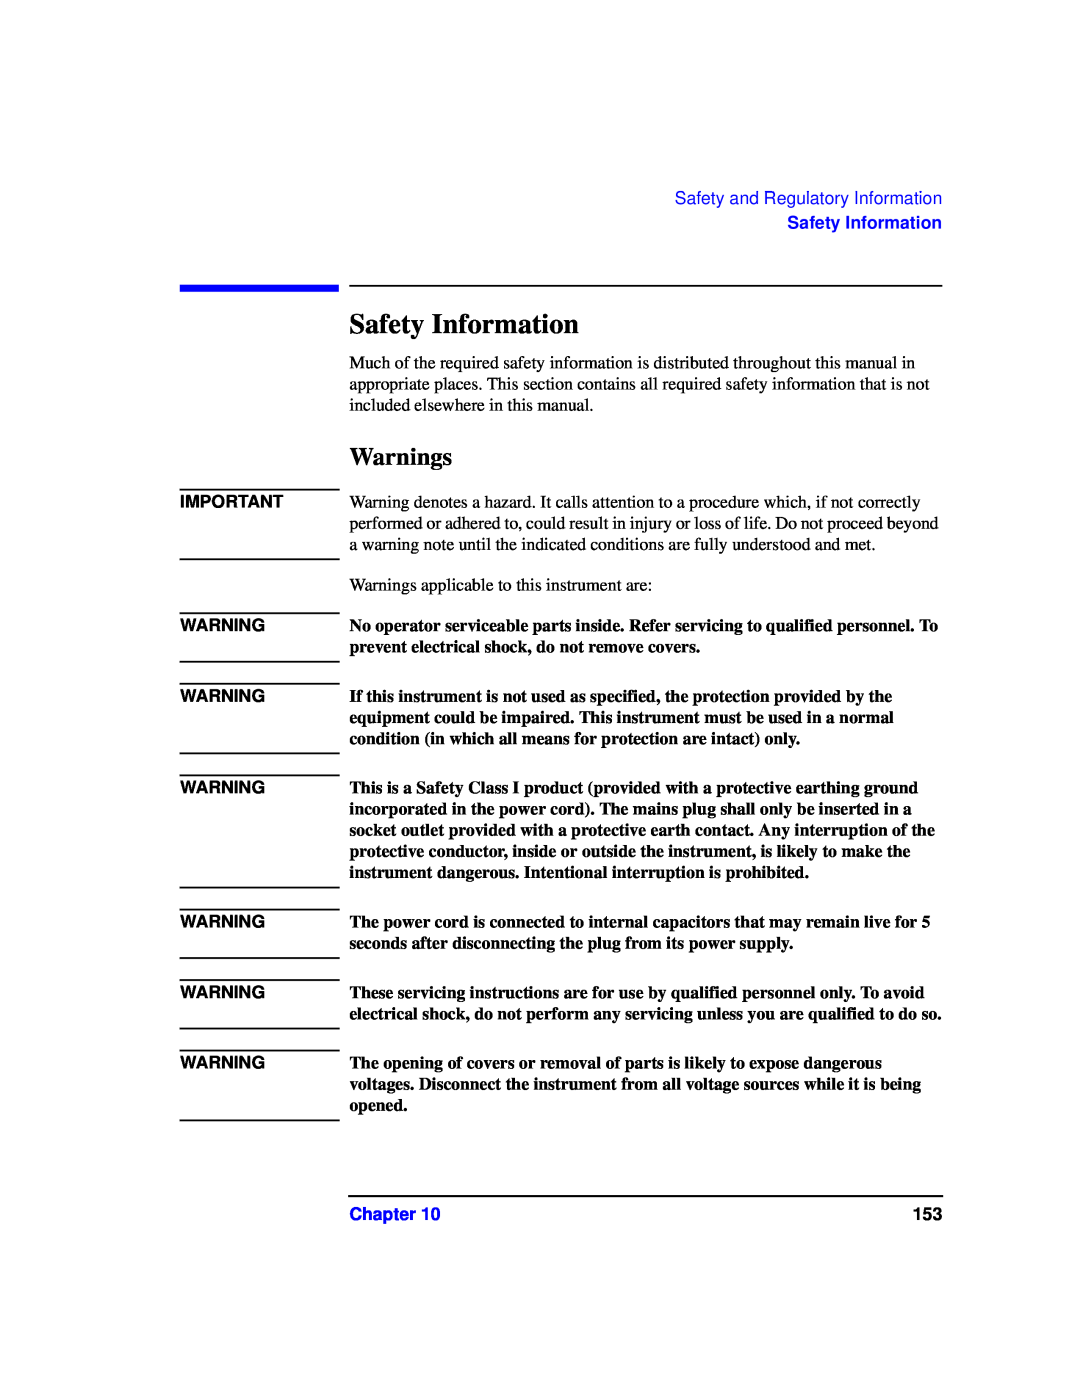 Agilent Technologies 87075C manual Safety Information, Warnings, Safety and Regulatory Information, Chapter 